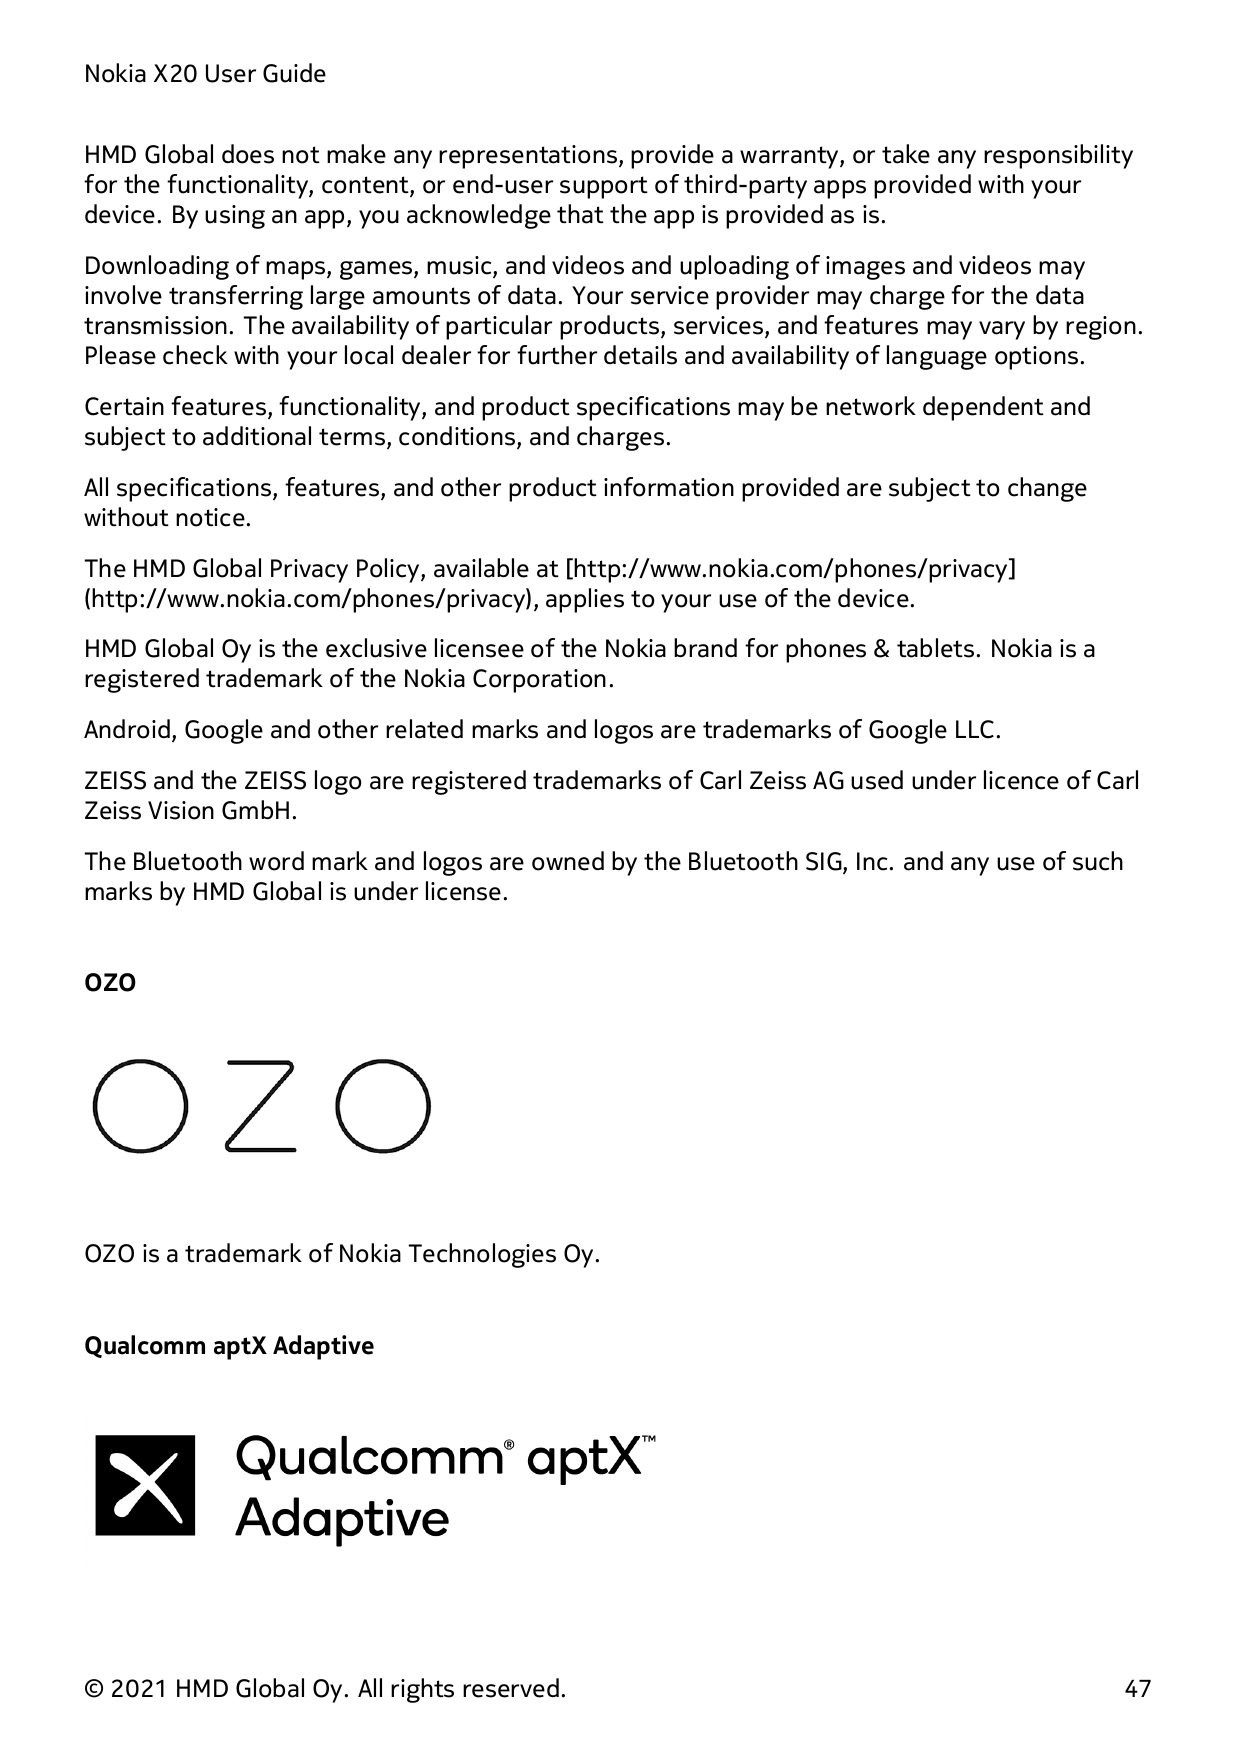 Nokia X20 User GuideHMD Global does not make any representations, provide a warranty, or take any responsibilityfor the function